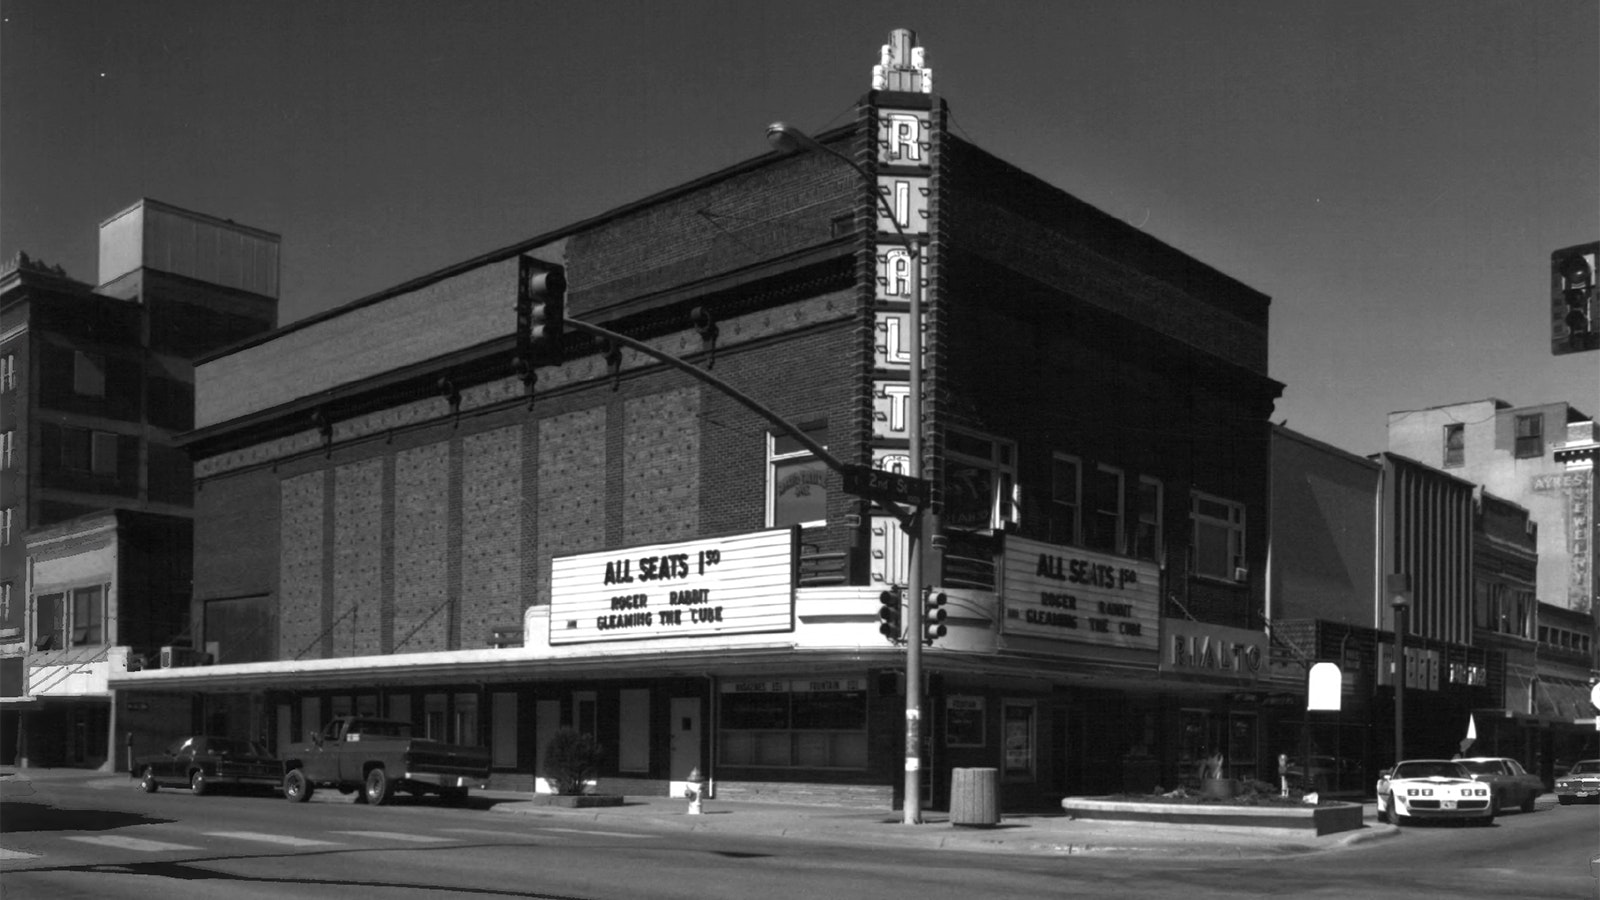 The Rialto Theater has been a Casper corner anchor since the 1920s. Here is a photo of the theater from 1989.